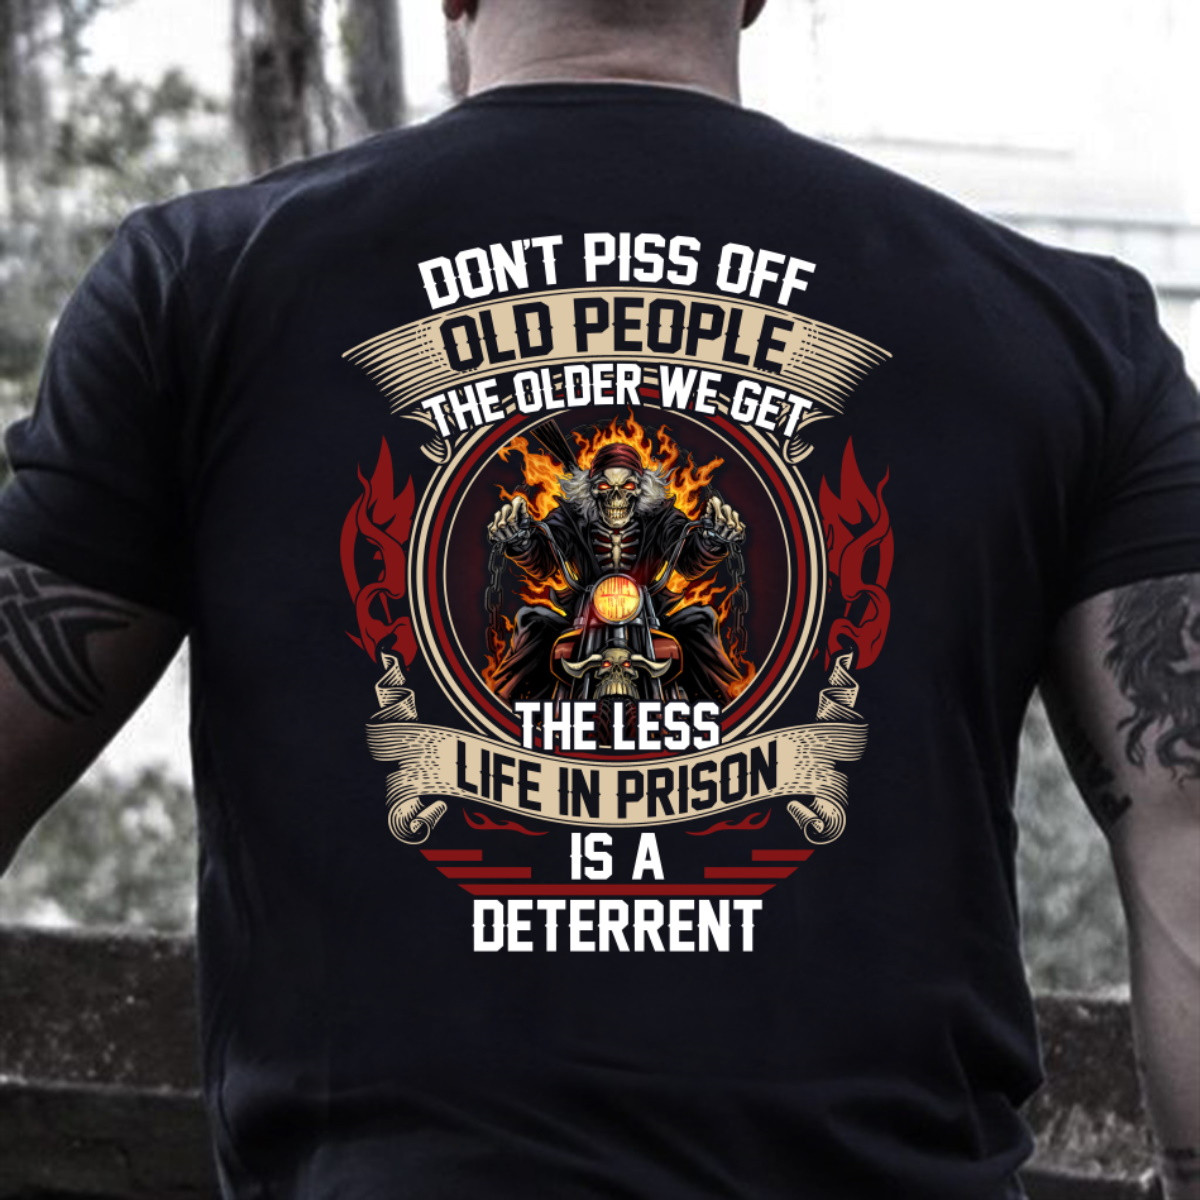 Don't Piss Off Old People The Older We Get The Less Life In Prison Is A Deterrent T-Shirt